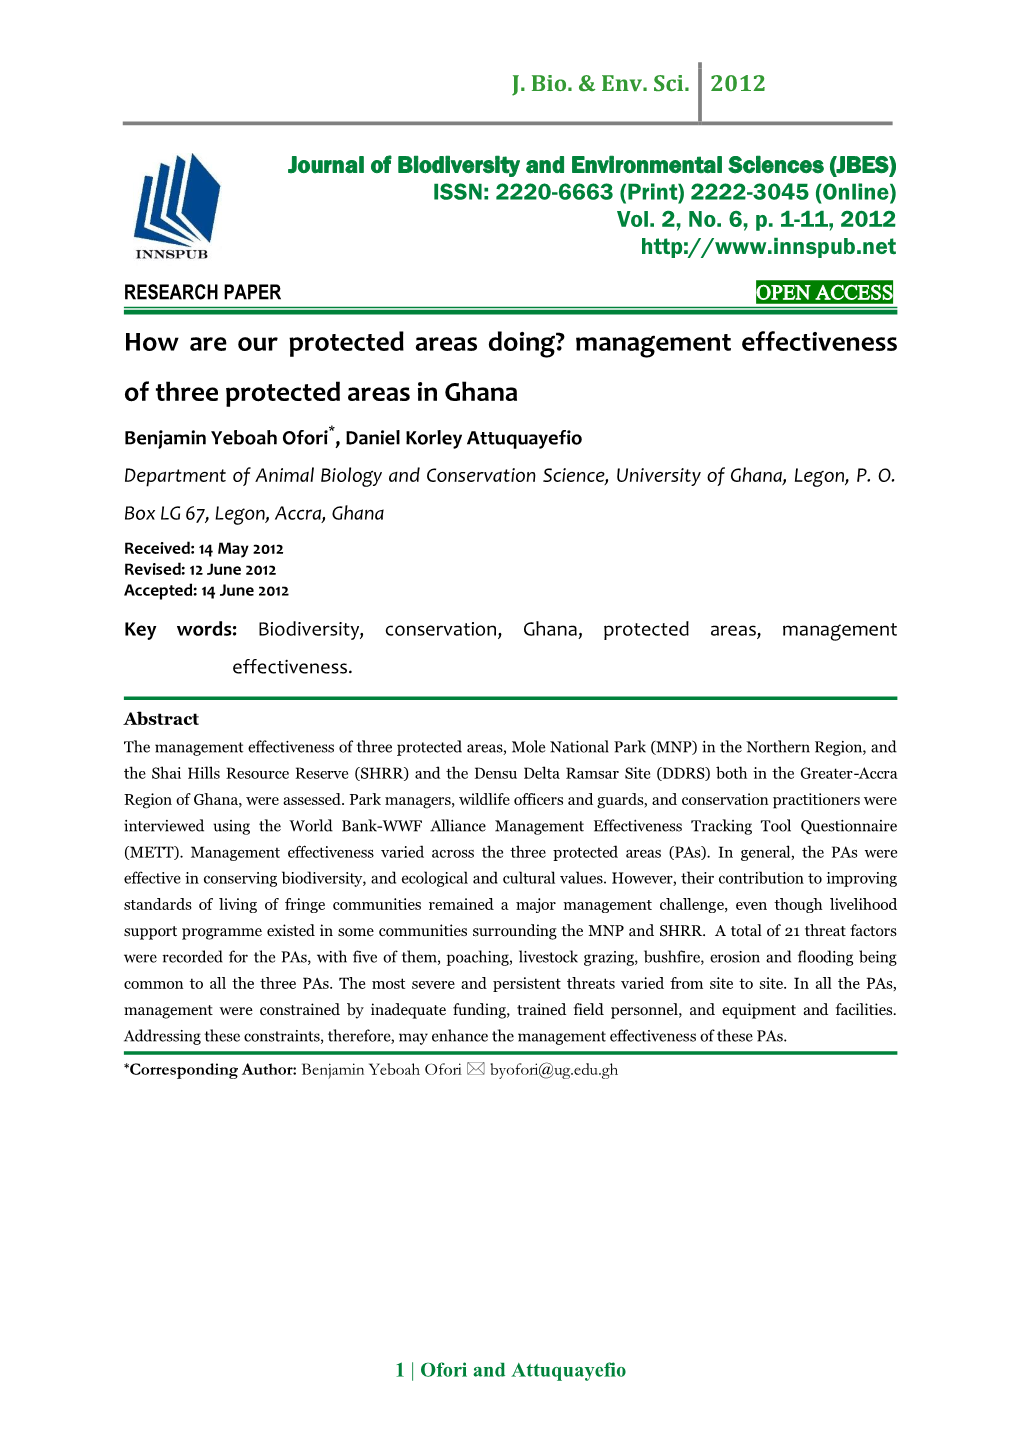 How Are Our Protected Areas Doing? Management Effectiveness of Three Protected Areas in Ghana